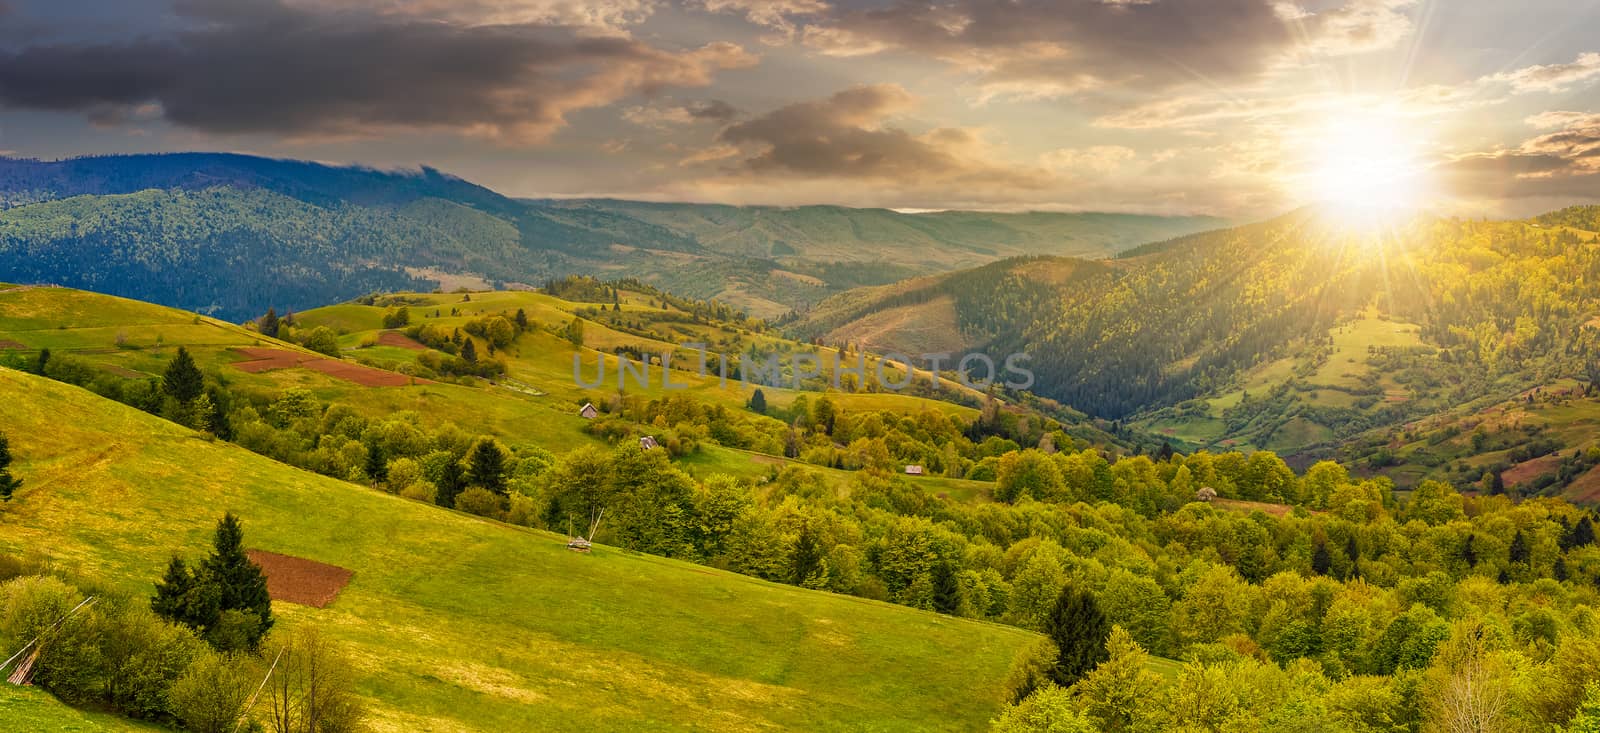 forest on a mountain hillside in rural area at sunset by Pellinni